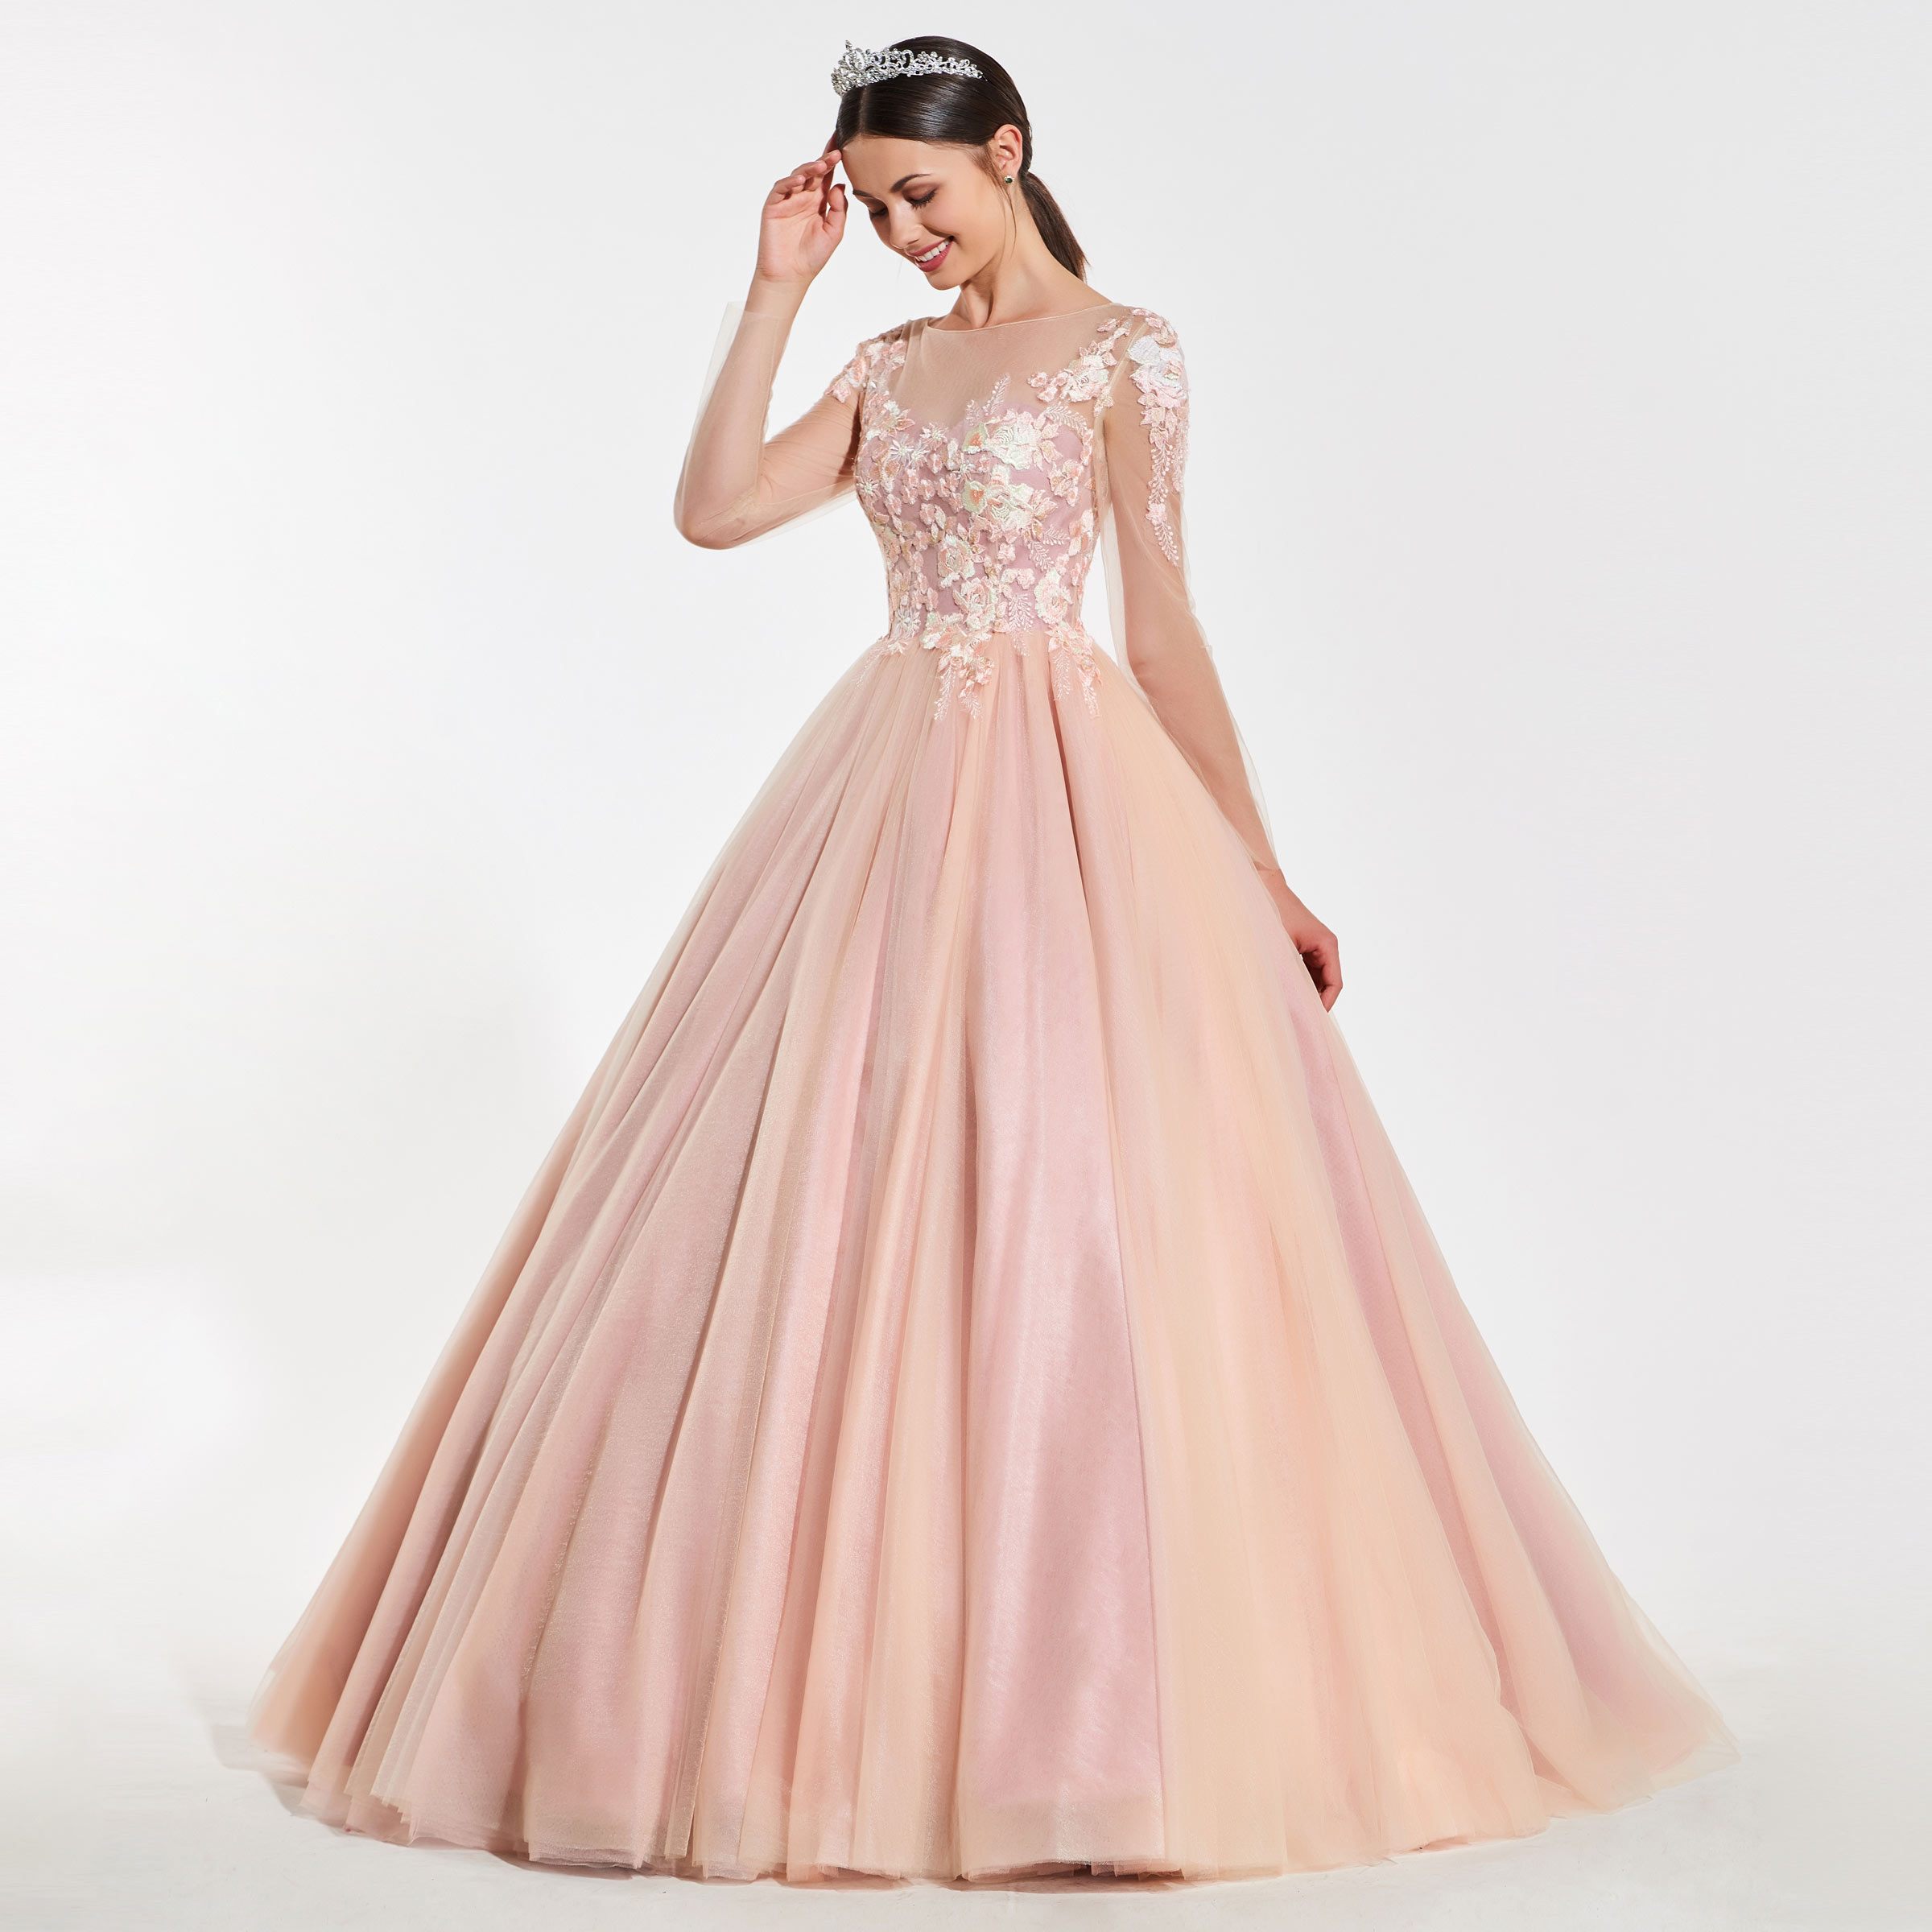 Illusion Neck Lace Appliques Long Sleeves Quinceanera Dress